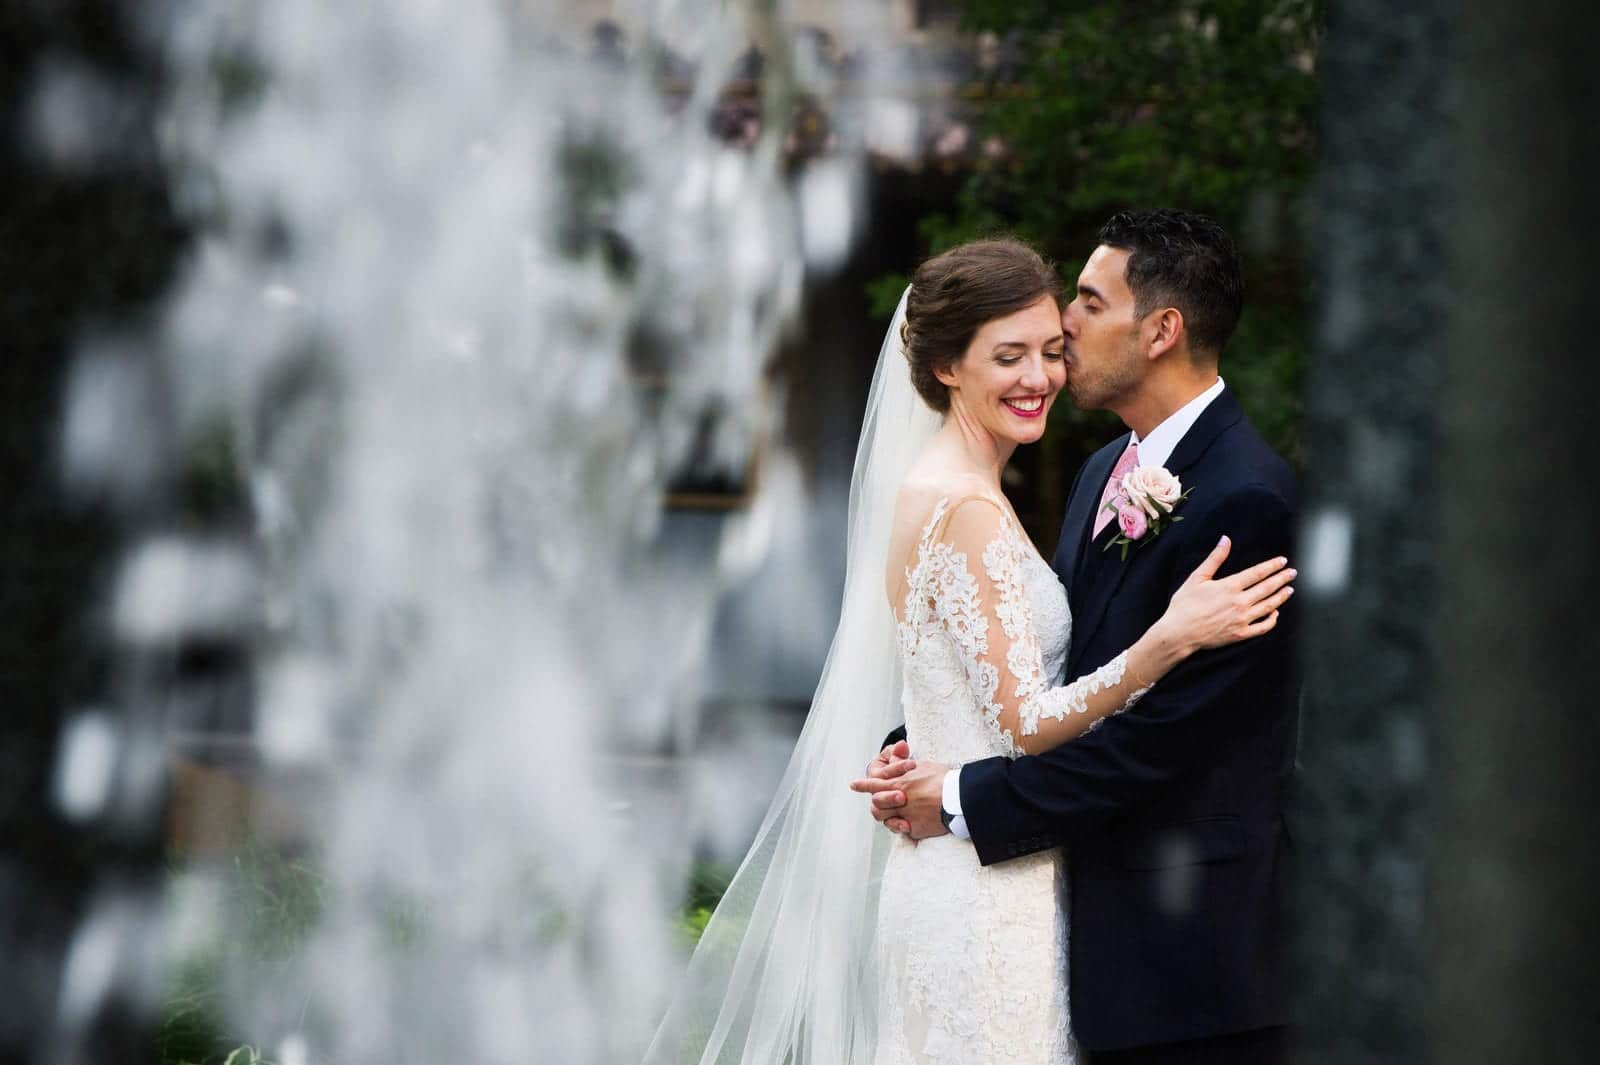 A smiling bride wearing a dress with lace sleeves is kissed on the cheek by her husband as seen through the waterfall across the street from the Omni William Penn.